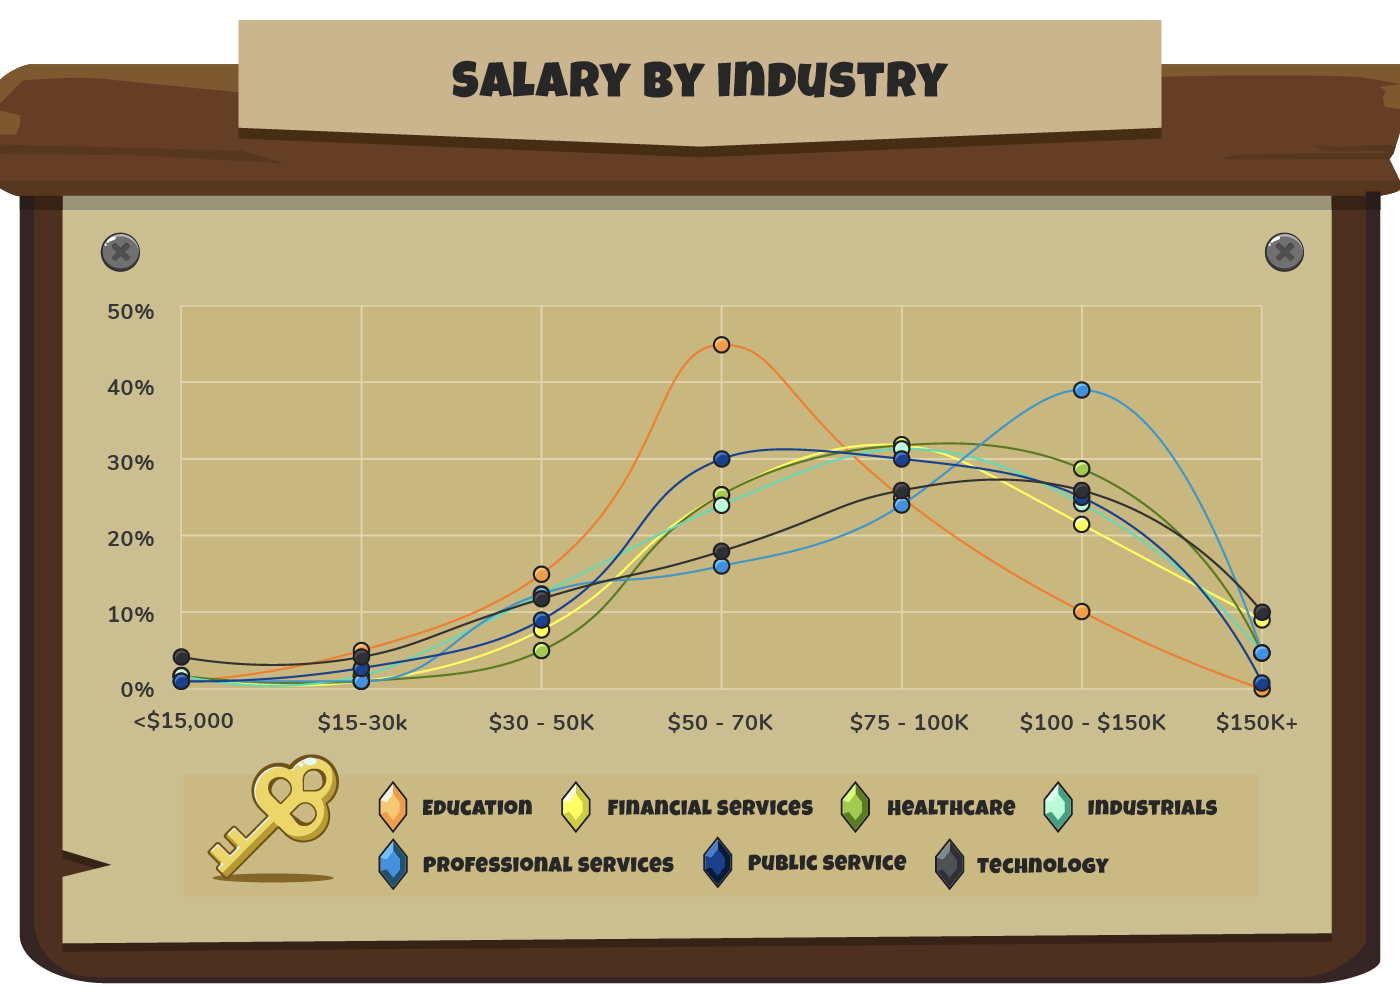 Salary by industry